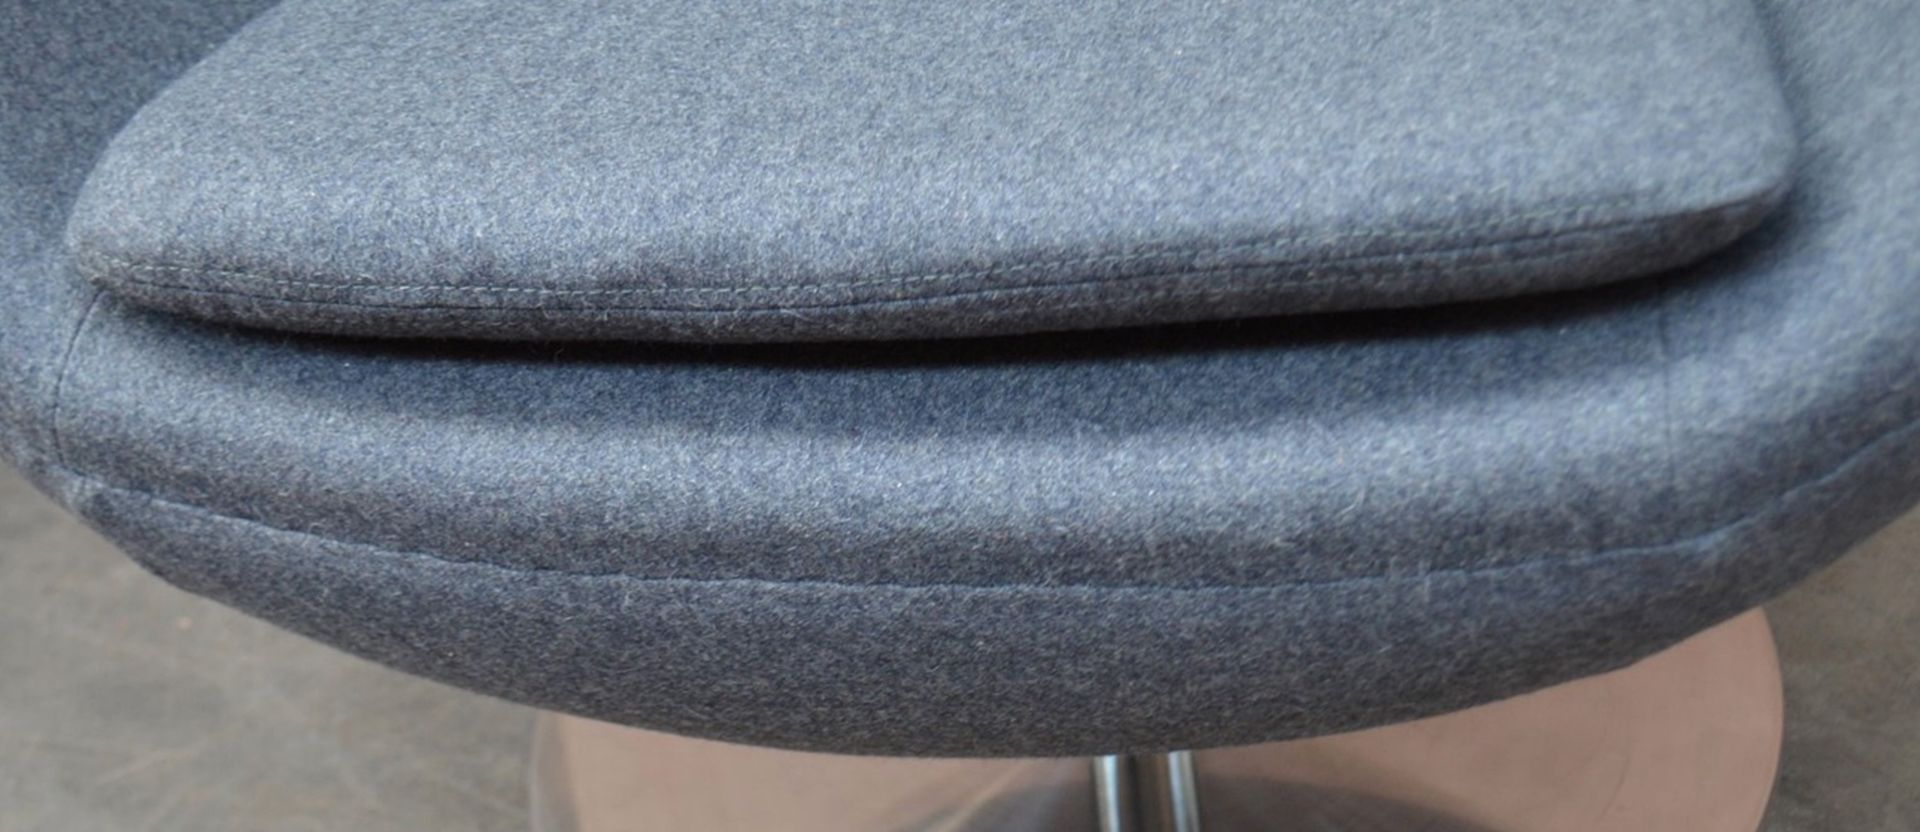 1 x Arne Jacobsen-Inspired Egg Lounge Chair - Upholstered In Grey Cashmere With Steel Base - Image 3 of 13